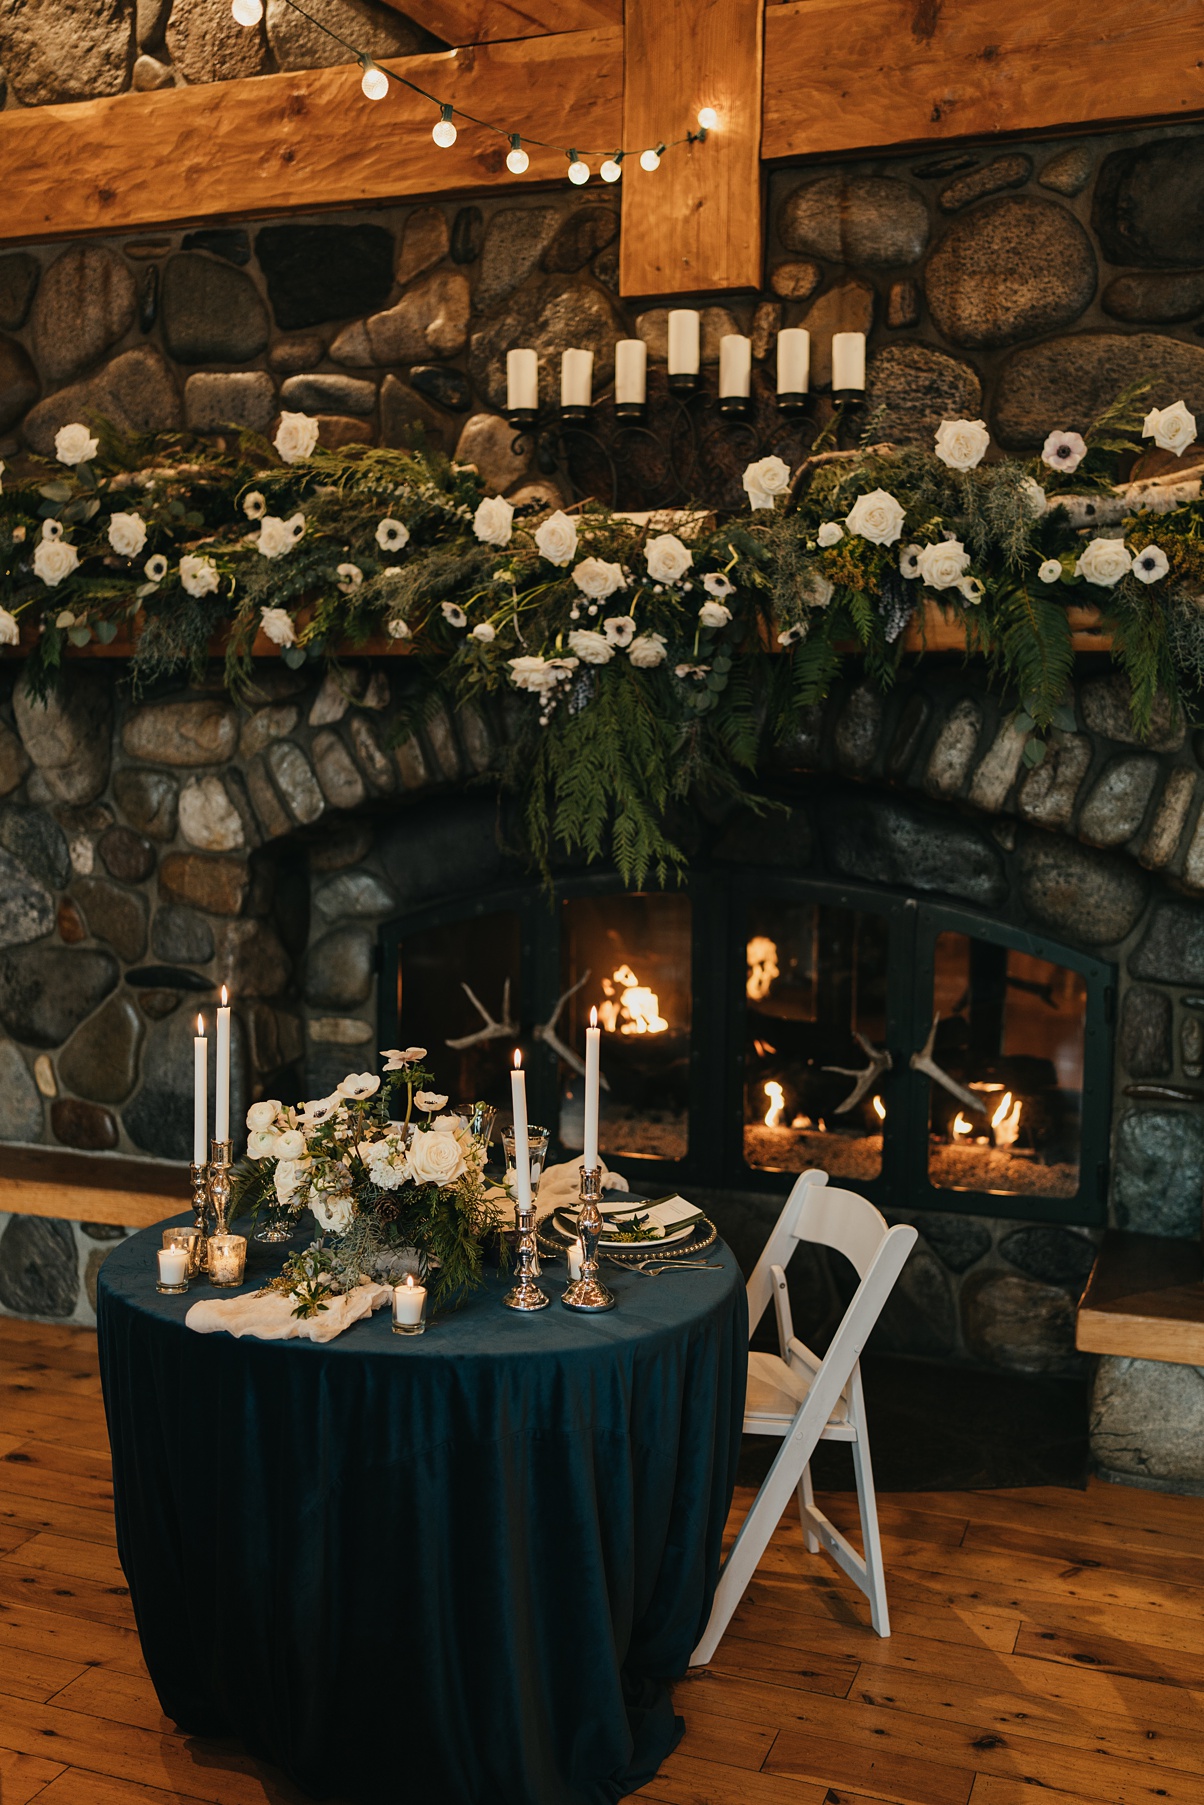 The sweetheart table and mantle floral installation